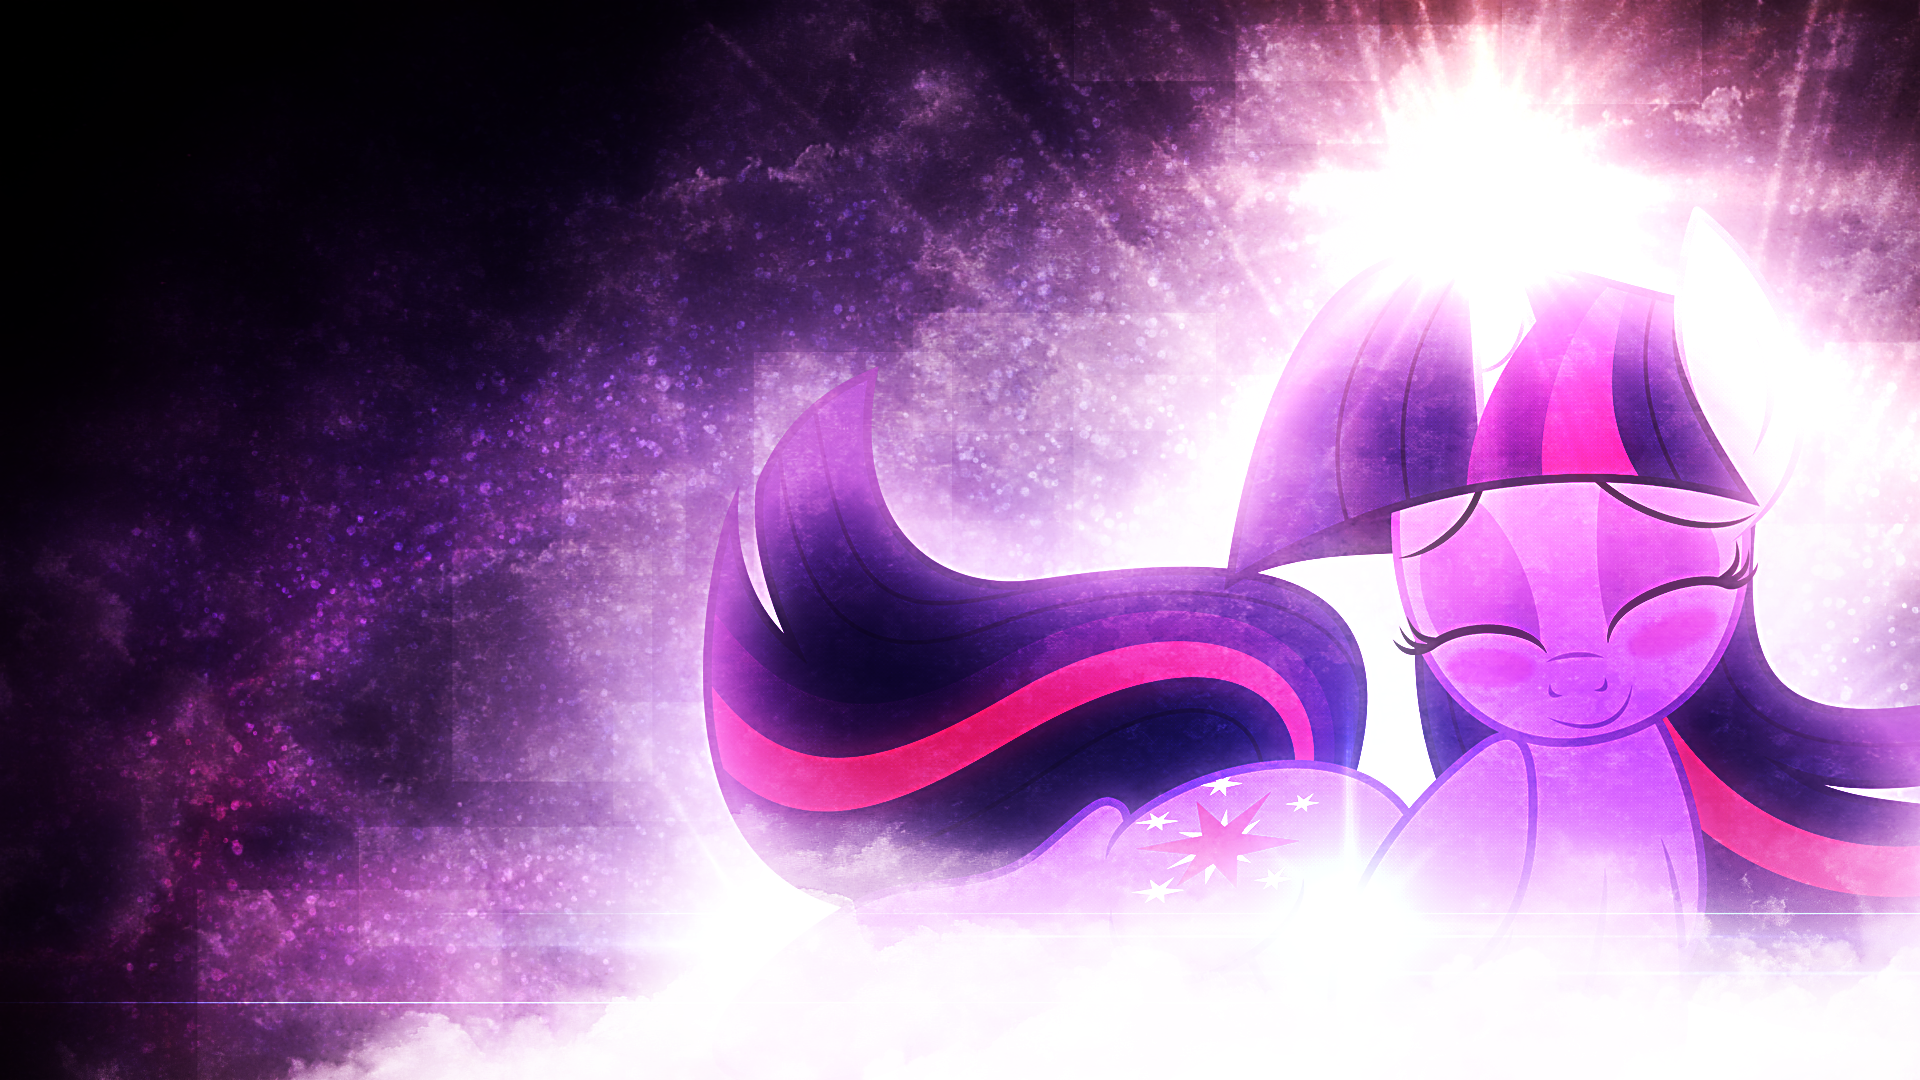 Flattered Twilight Wallpaper by Lolover, Mamandil and Tzolkine